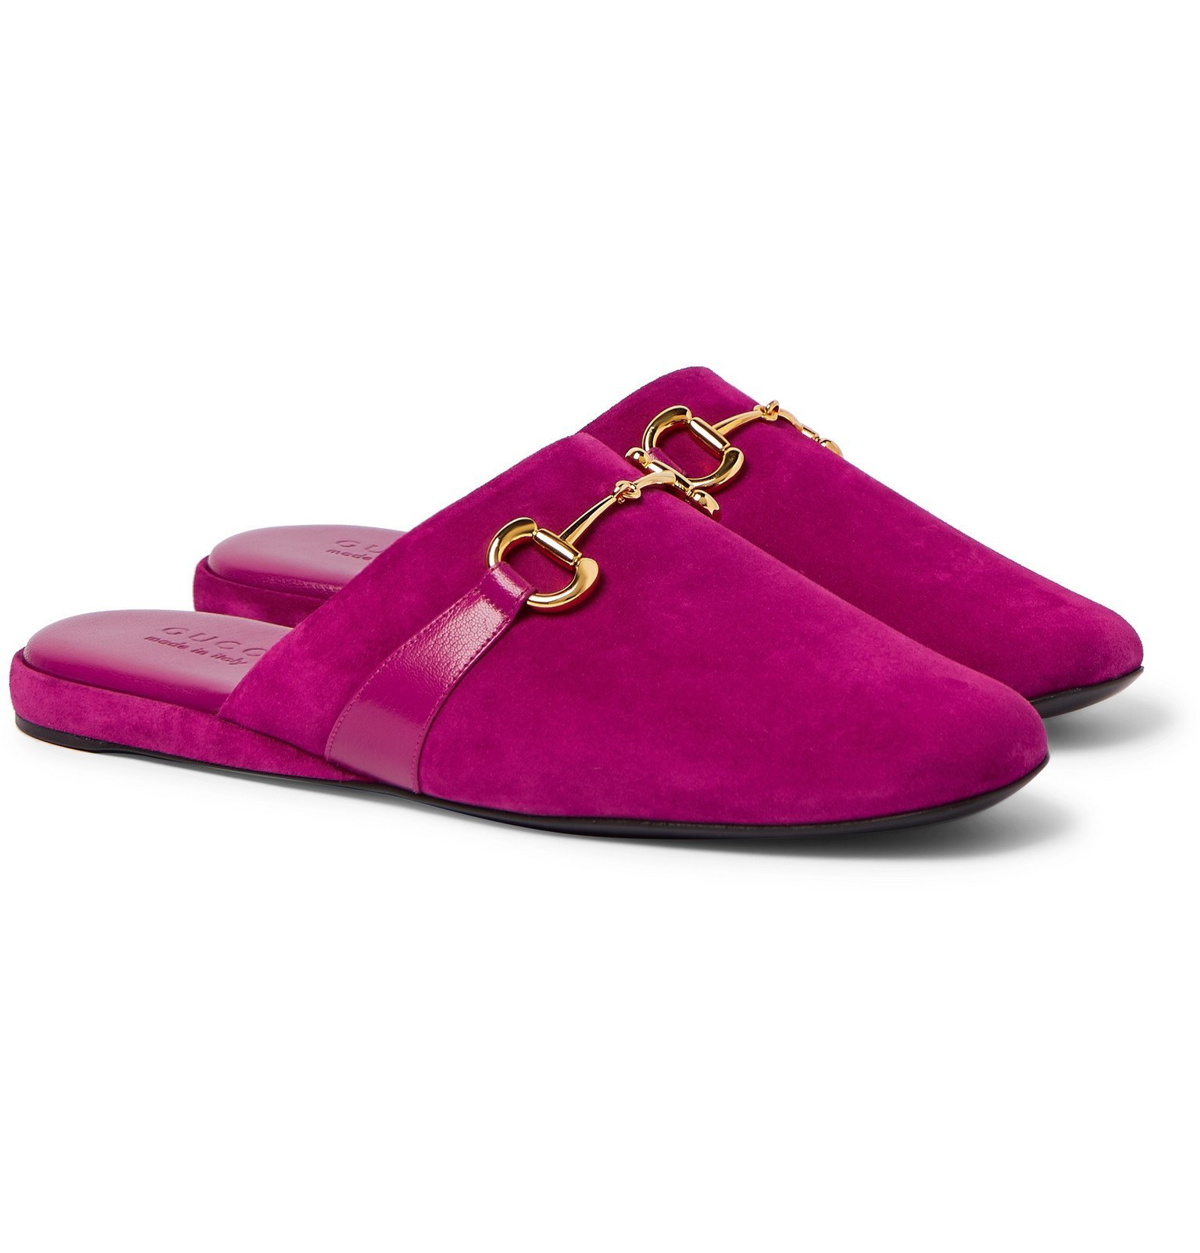 - Pericle Horsebit Suede Slippers Pink